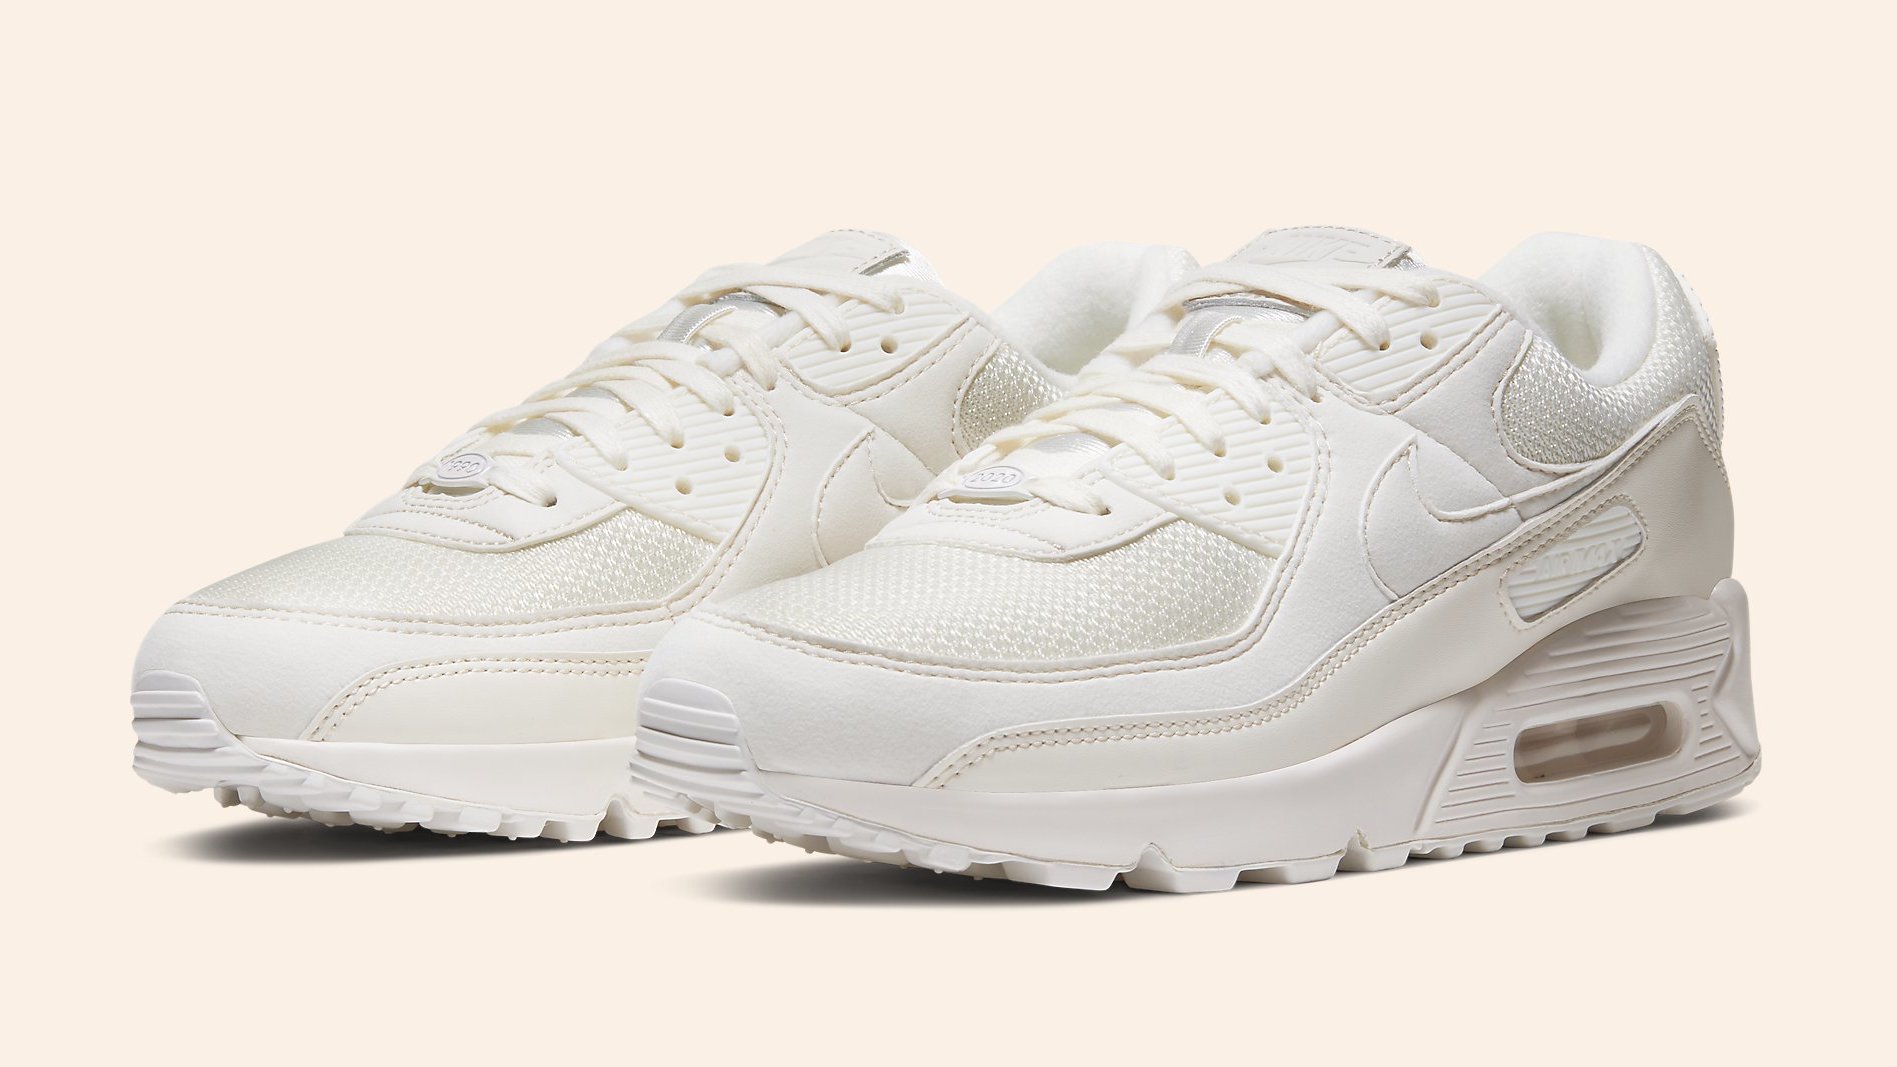 The Nike Air Max 90 Is Returning In Its Original Shape For Its